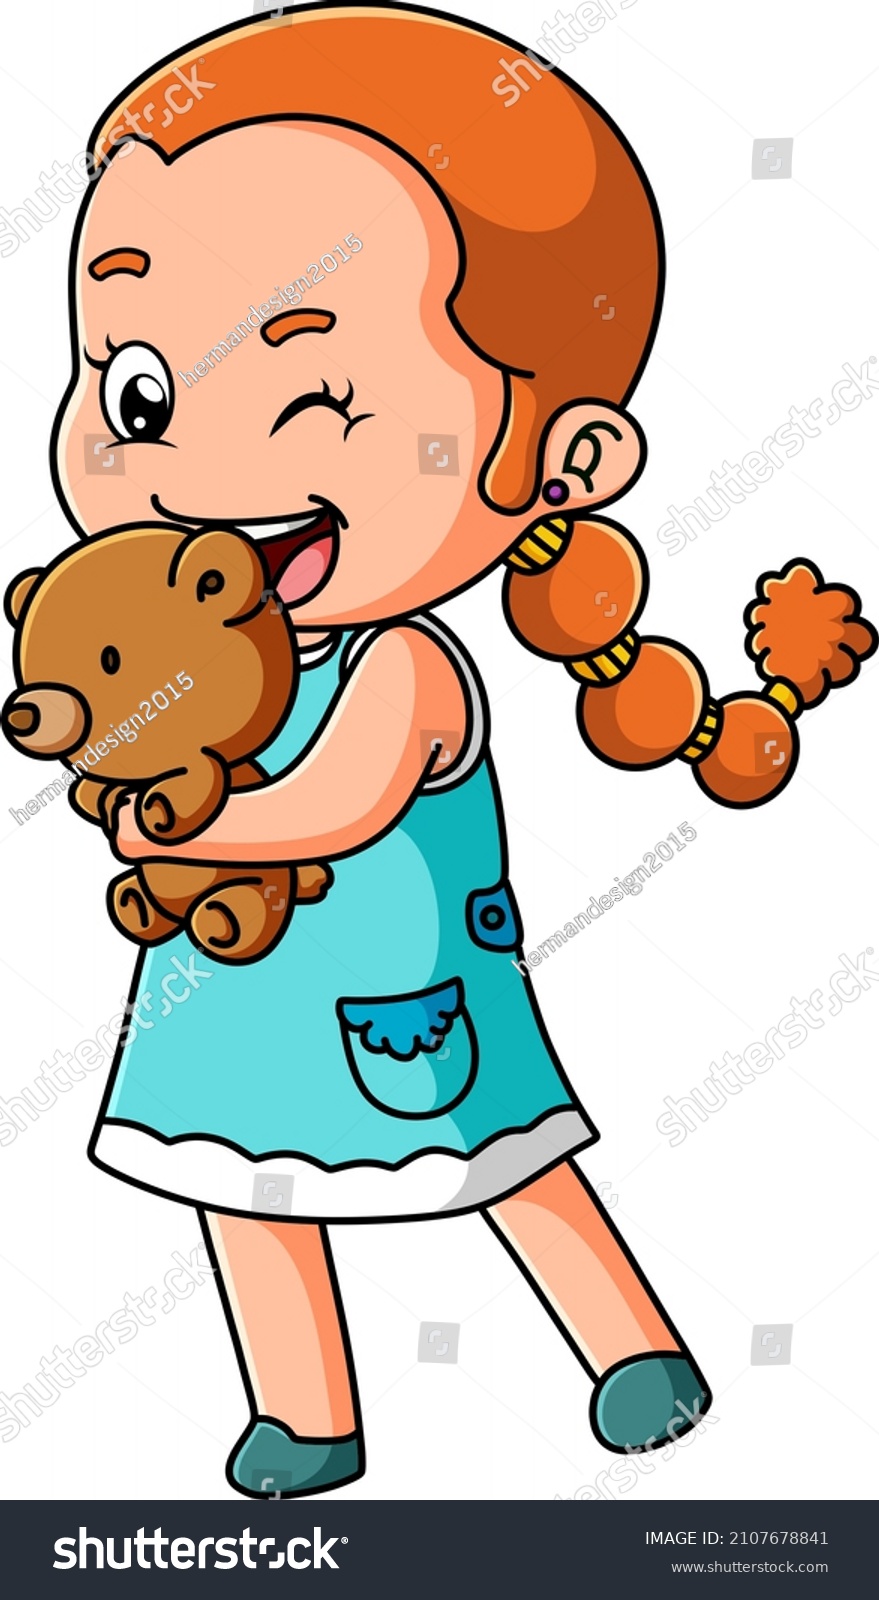 SVG of The little girl with the cute dress is holding the favorite doll of illustration svg